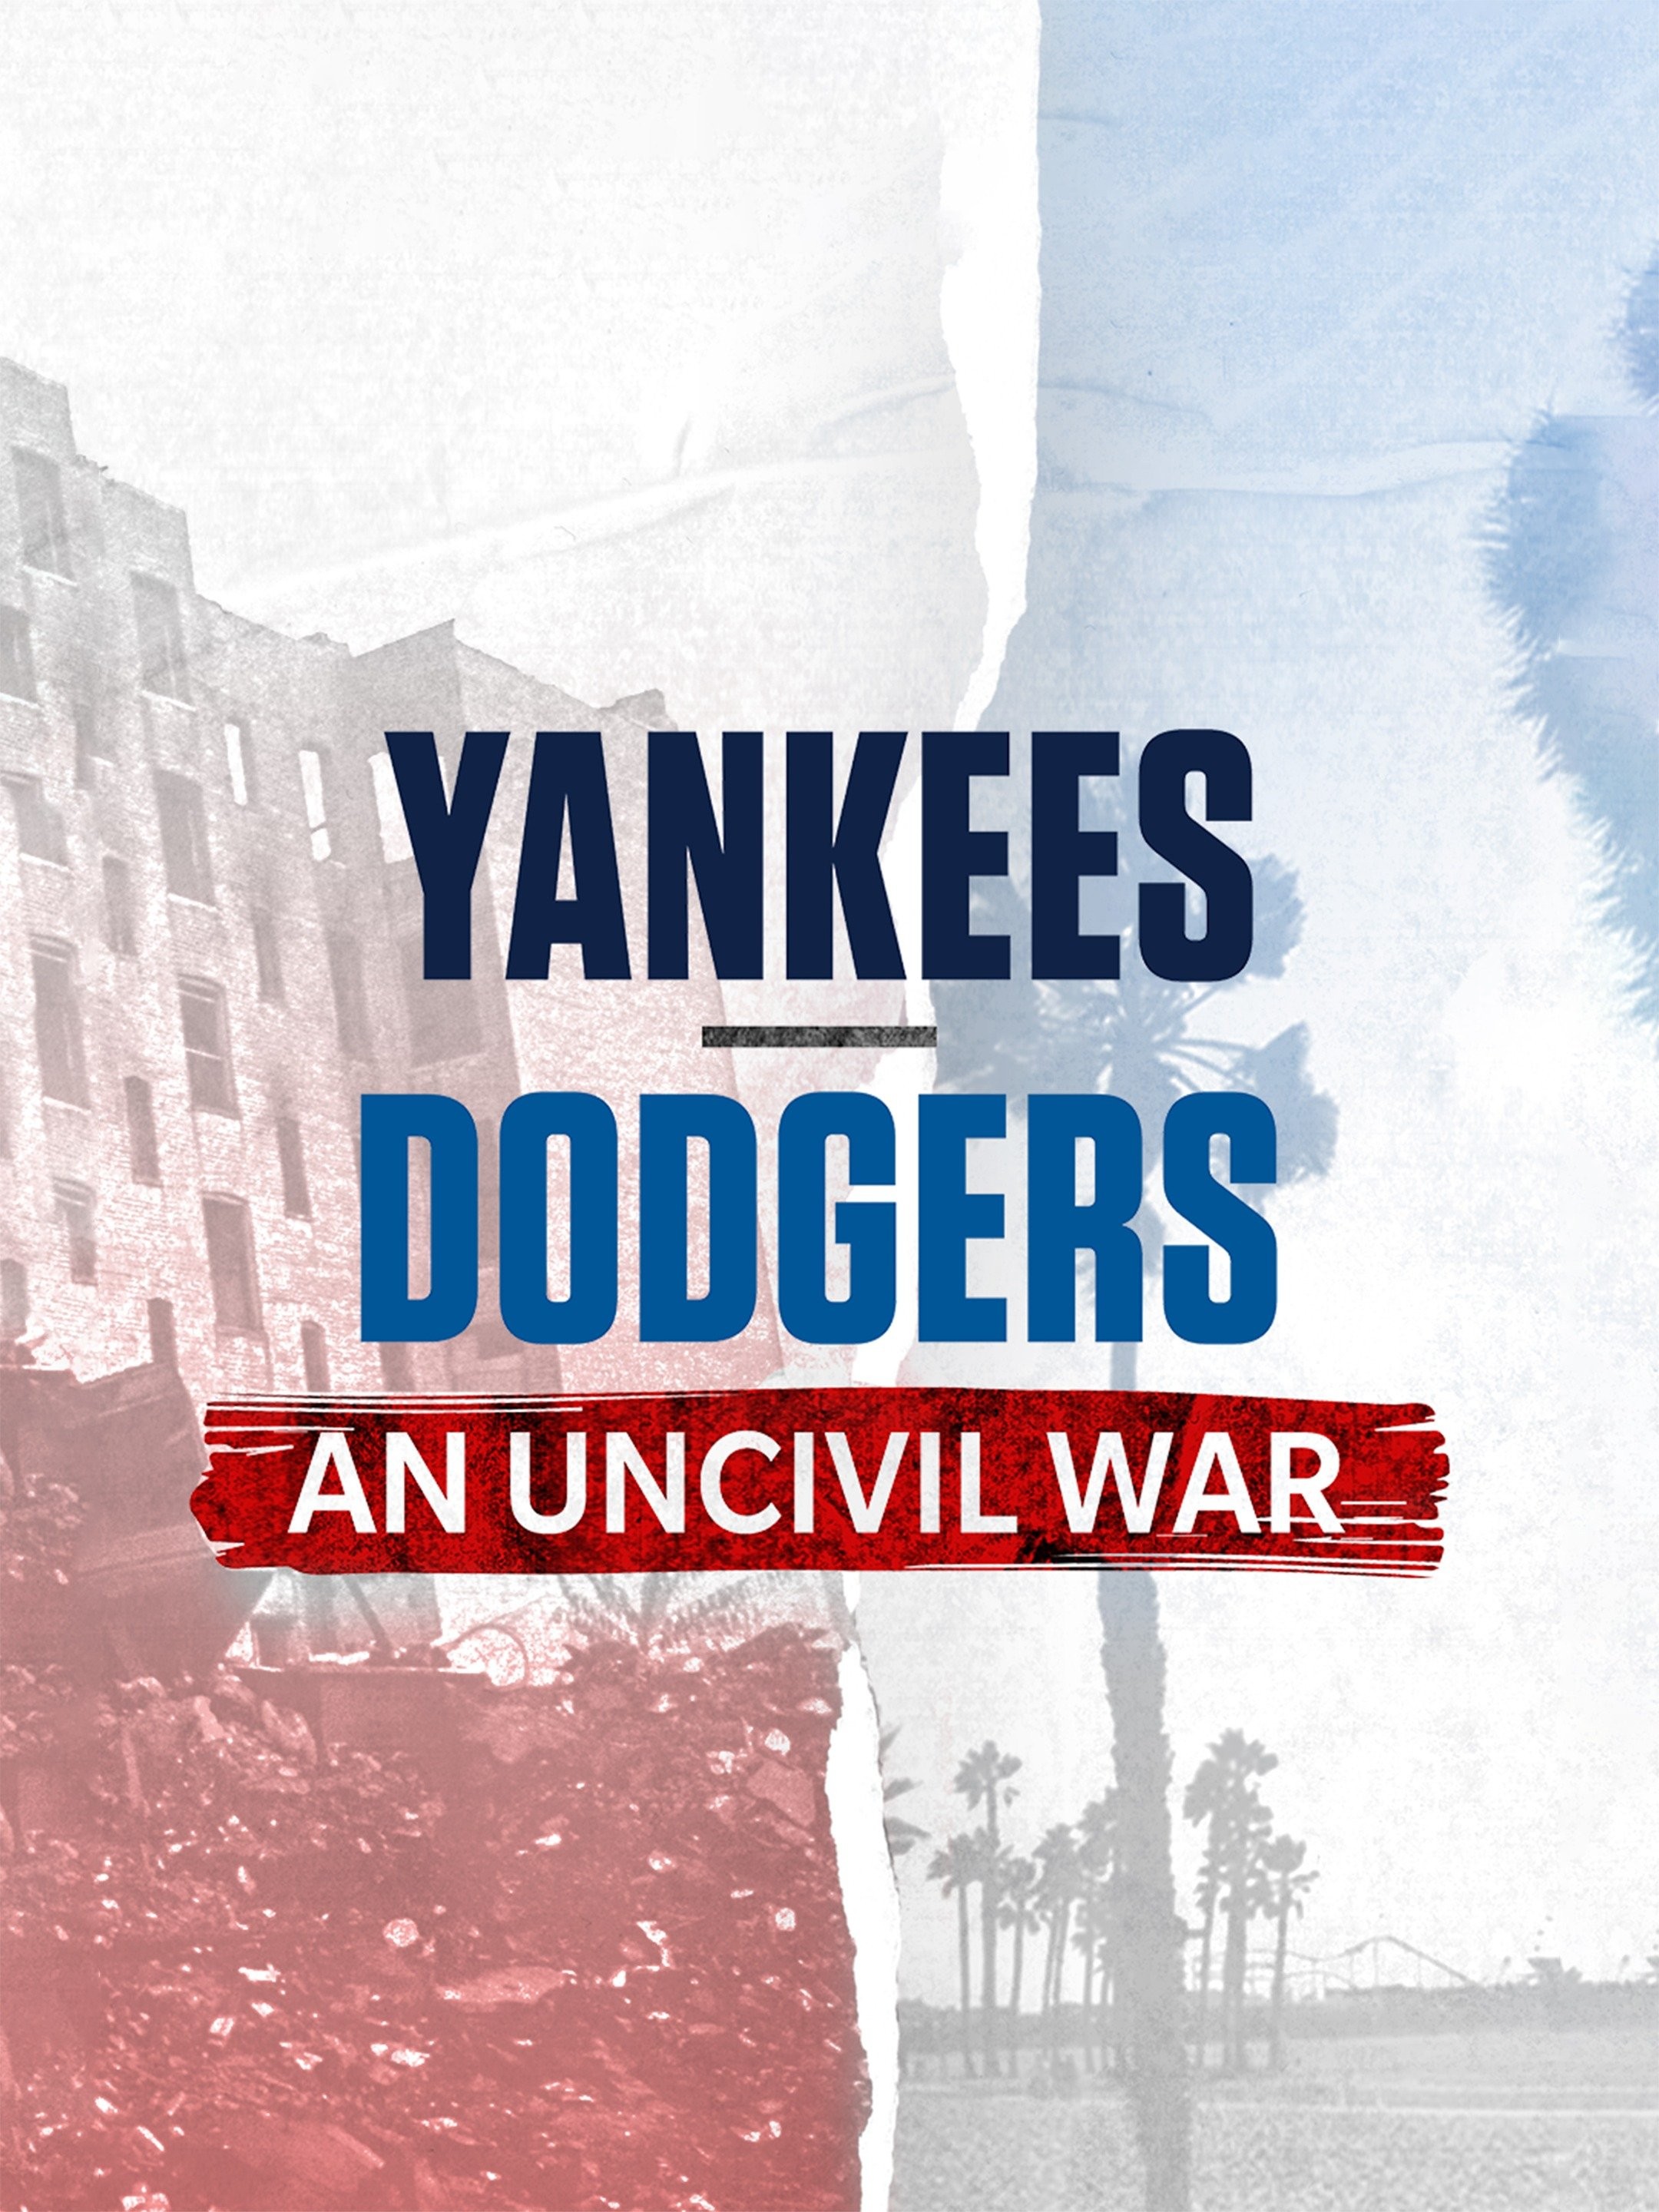 Dodgers: The Revival of the Yankees-Dodgers Rivalry